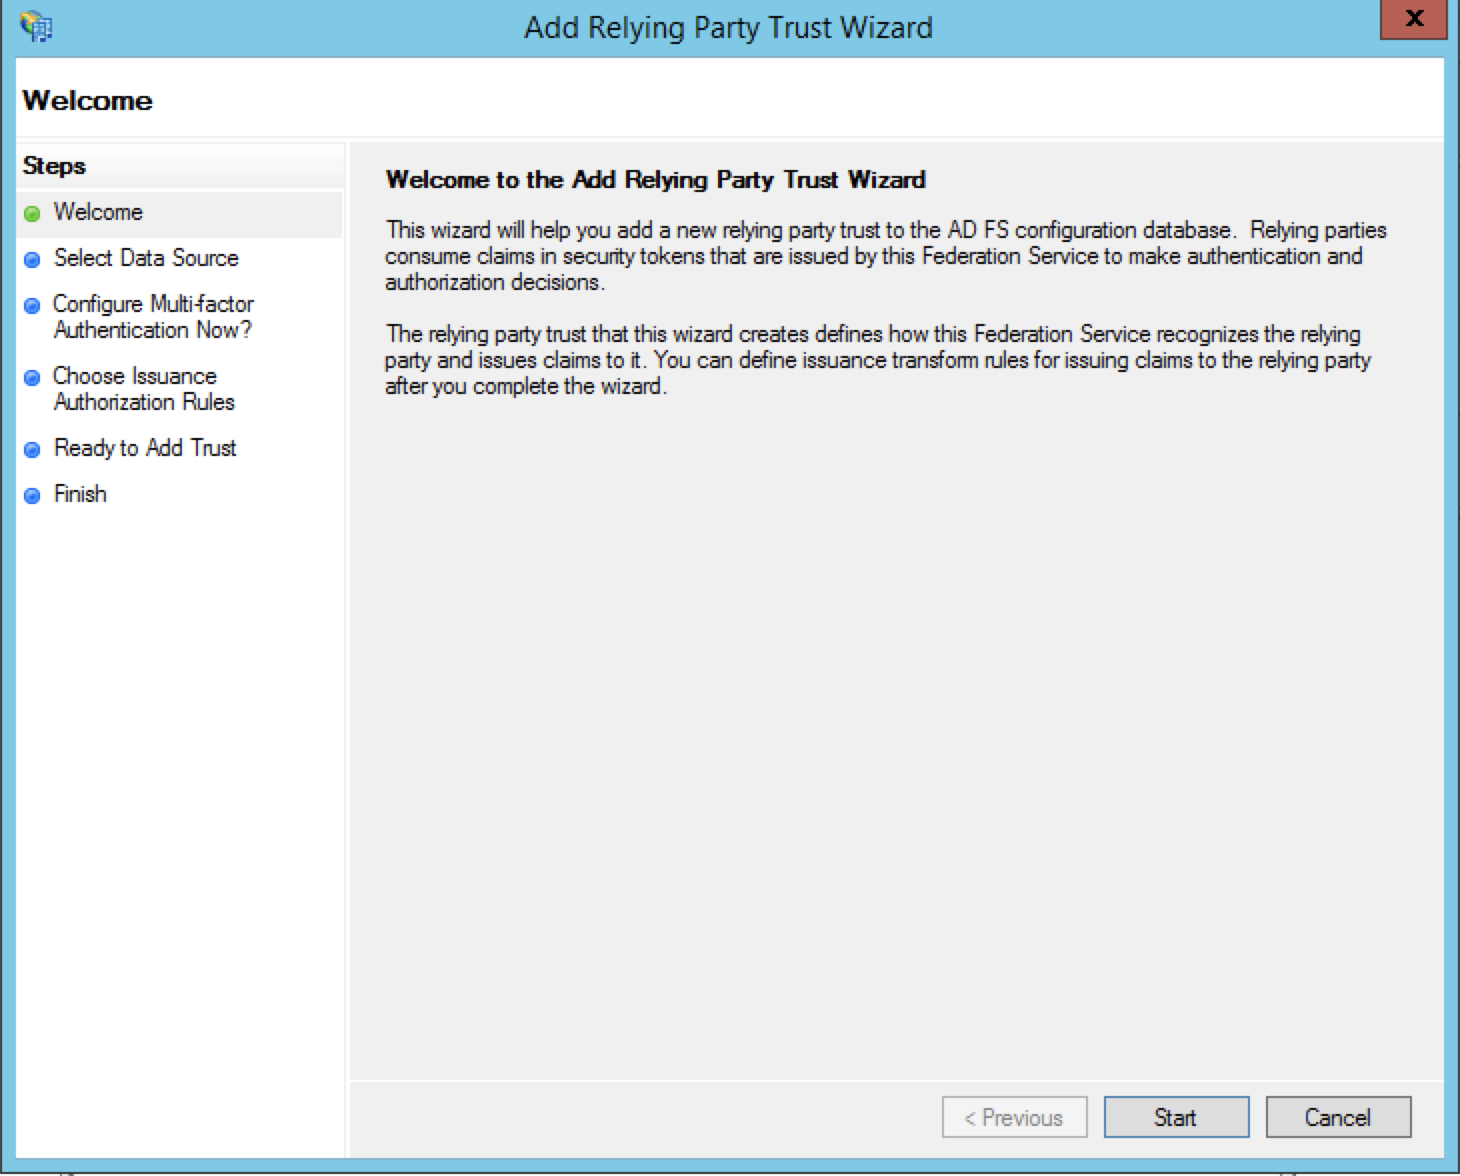 Add Relying Party Trust Wizard